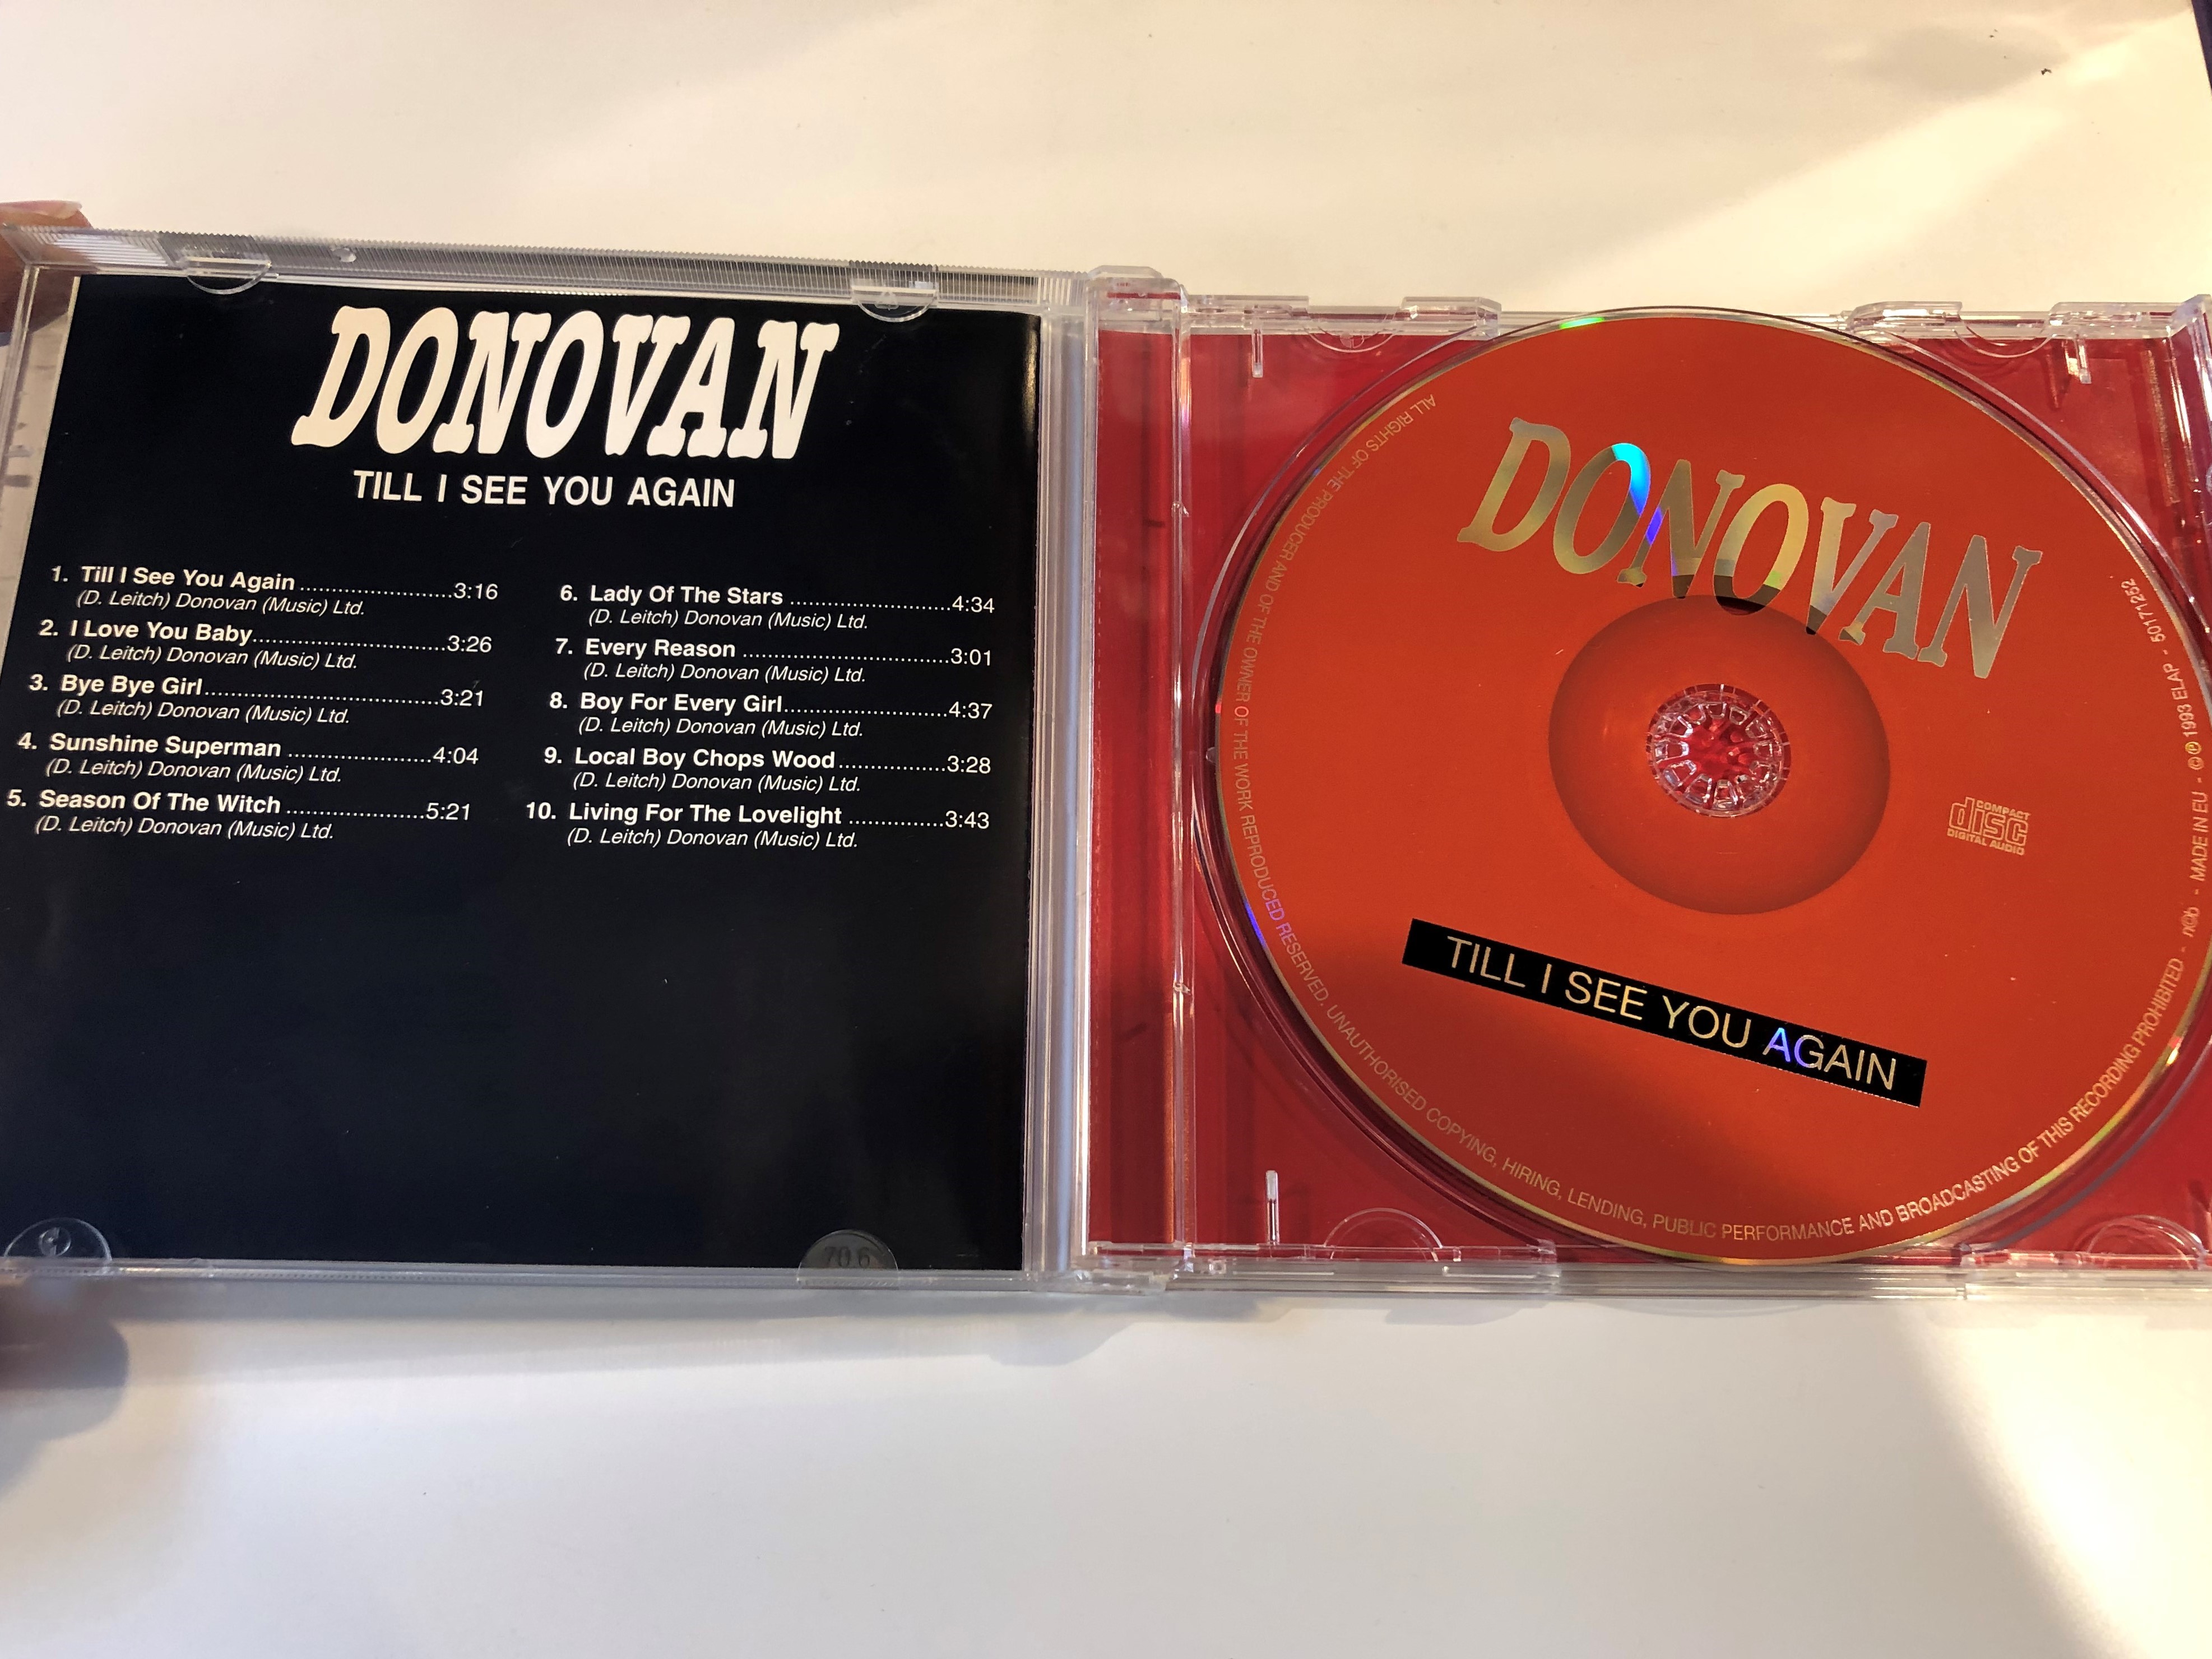 donovan-till-i-see-you-again-season-of-the-witch-bye-bye-girl-for-every-boy-there-is-a-girl-i-love-you-baby-and-many-more...-elap-music-audio-cd-1993-50171252-2-.jpg